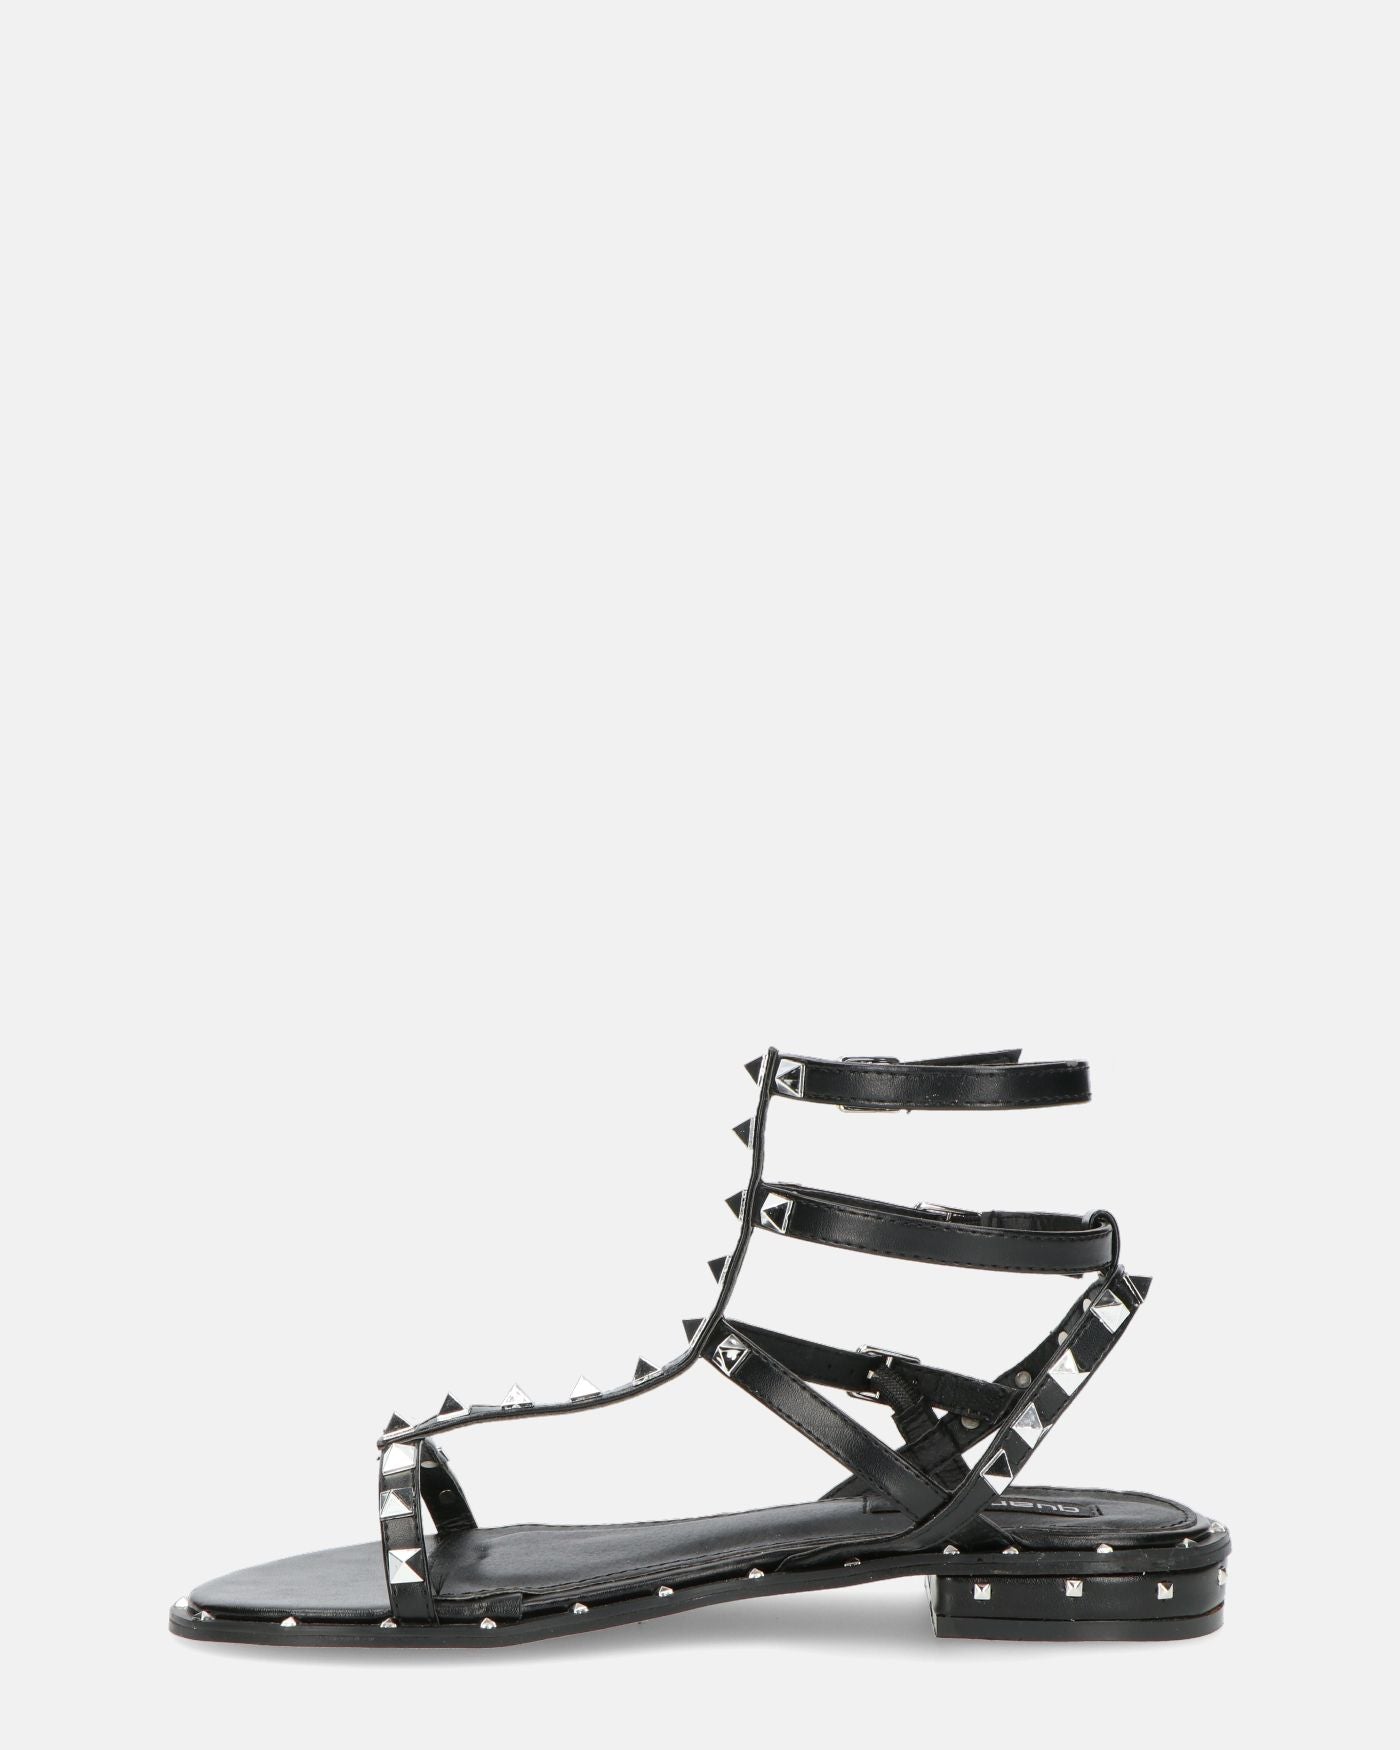 KENZA - black sandals with straps and studs